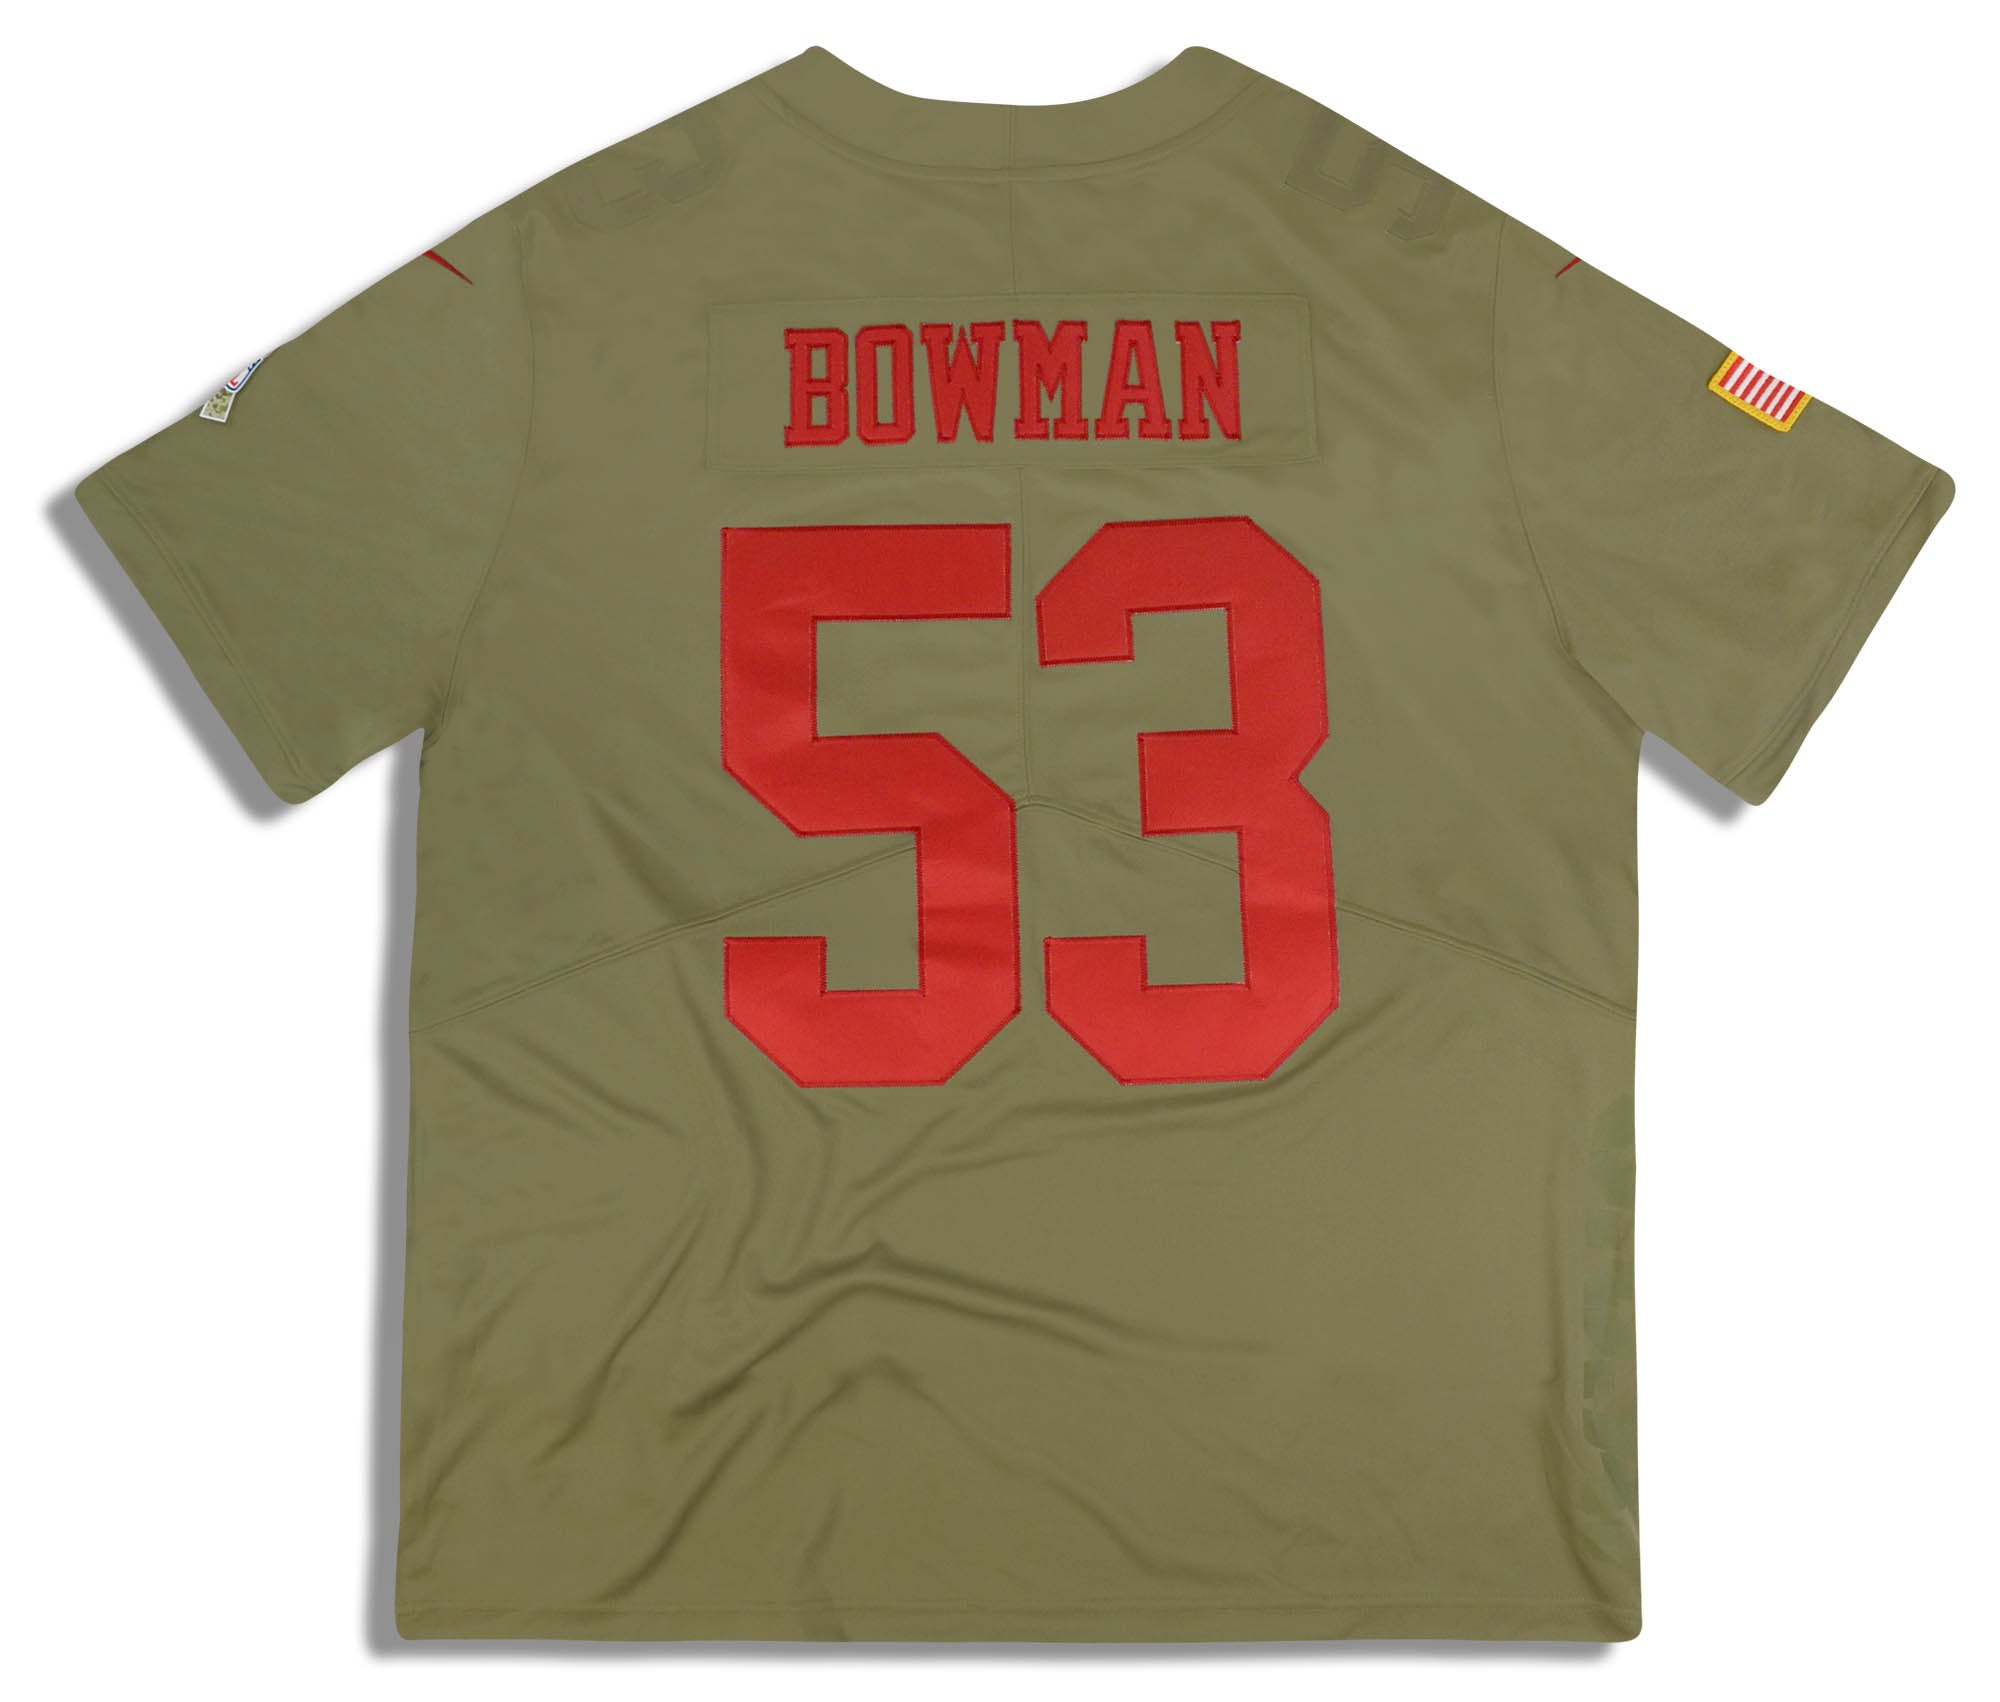 2017 SAN FRANCISCO 49ERS BOWMAN #53 SALUTE TO SERVICE NIKE LIMITED JERSEY (ALTERNATE) XXL - W/TAGS